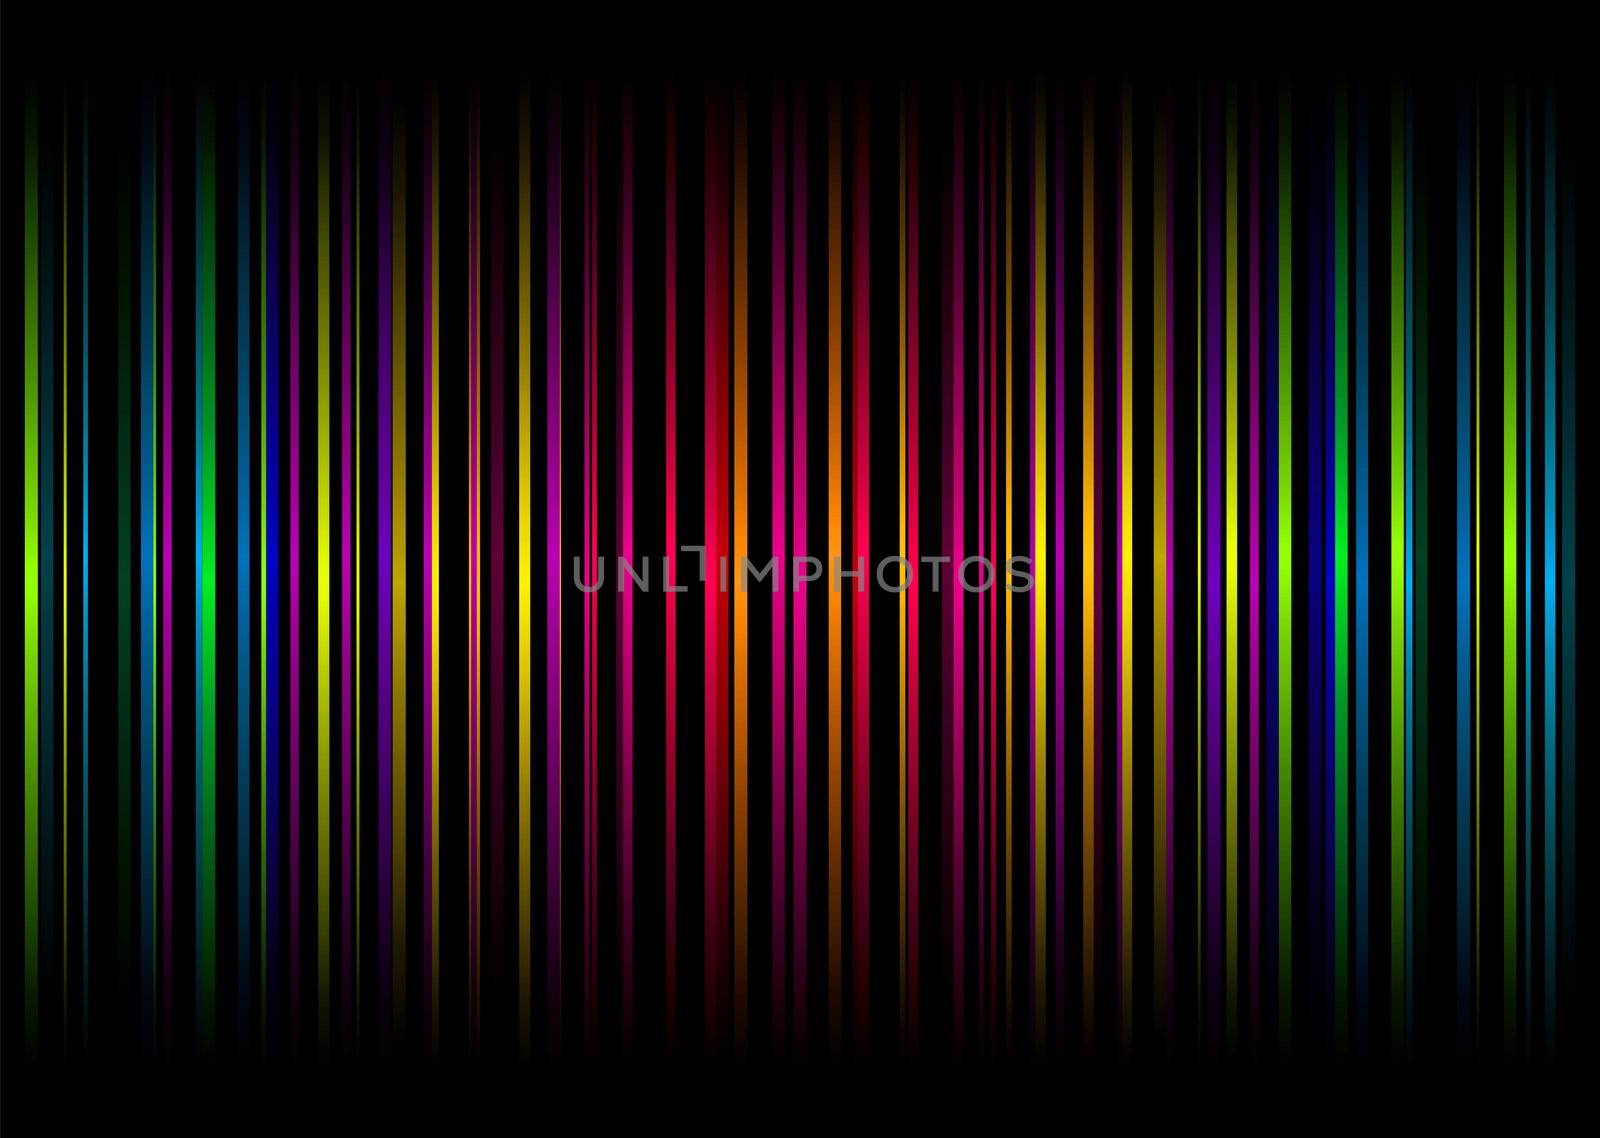 Colourful illustrated abstract background with vertical bars and stripes